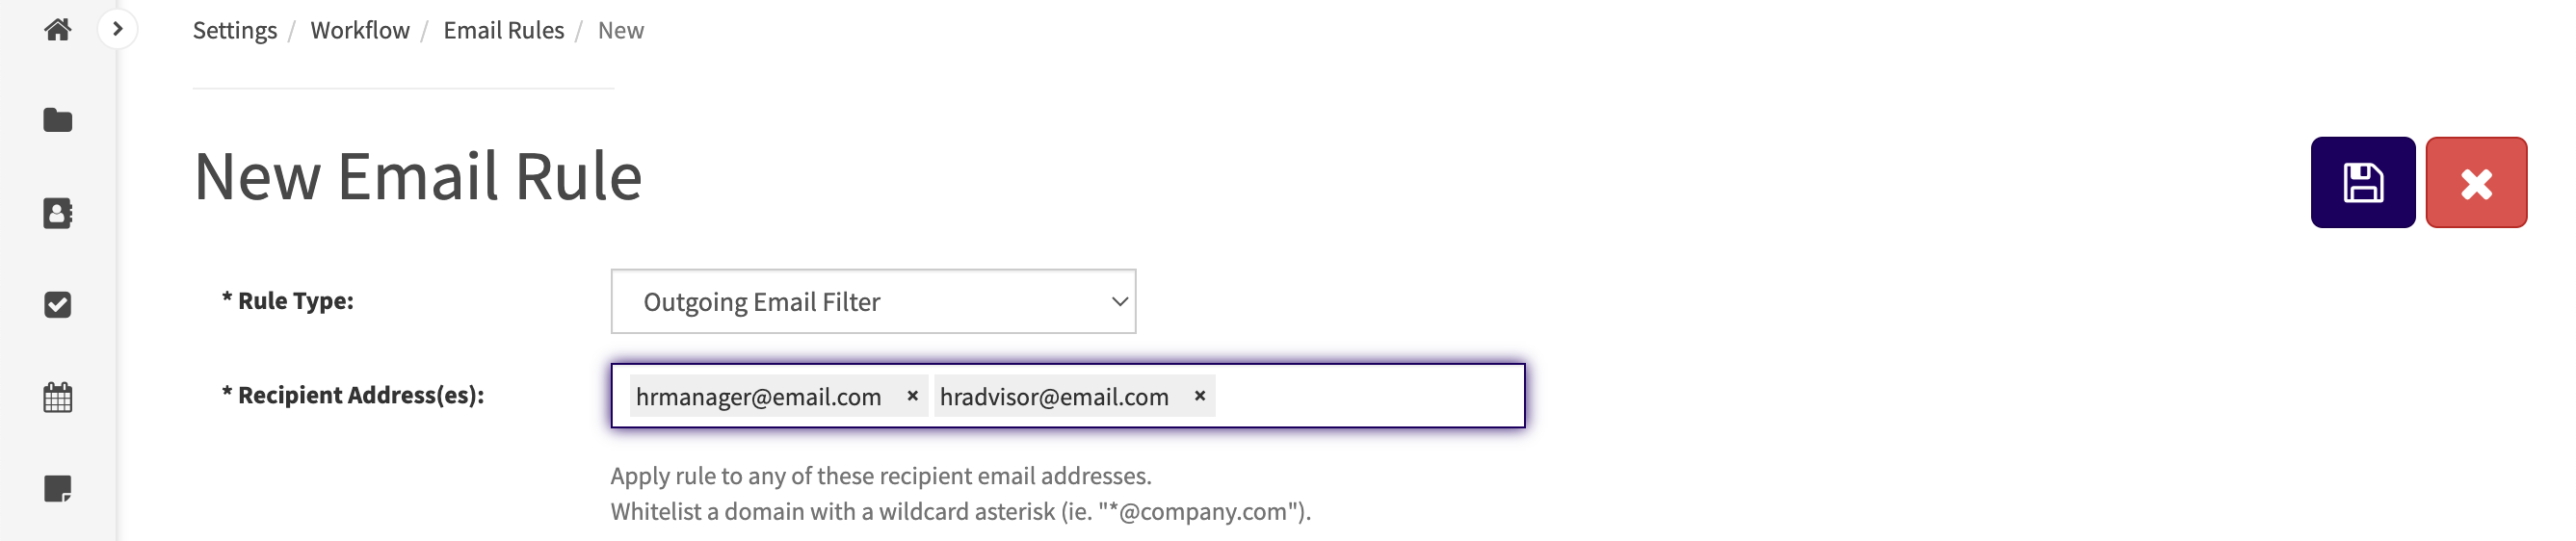 Two emails have been entered in the Recipient Address(es) field: "hrmanager@email.com" and "hradvisor@email.com".